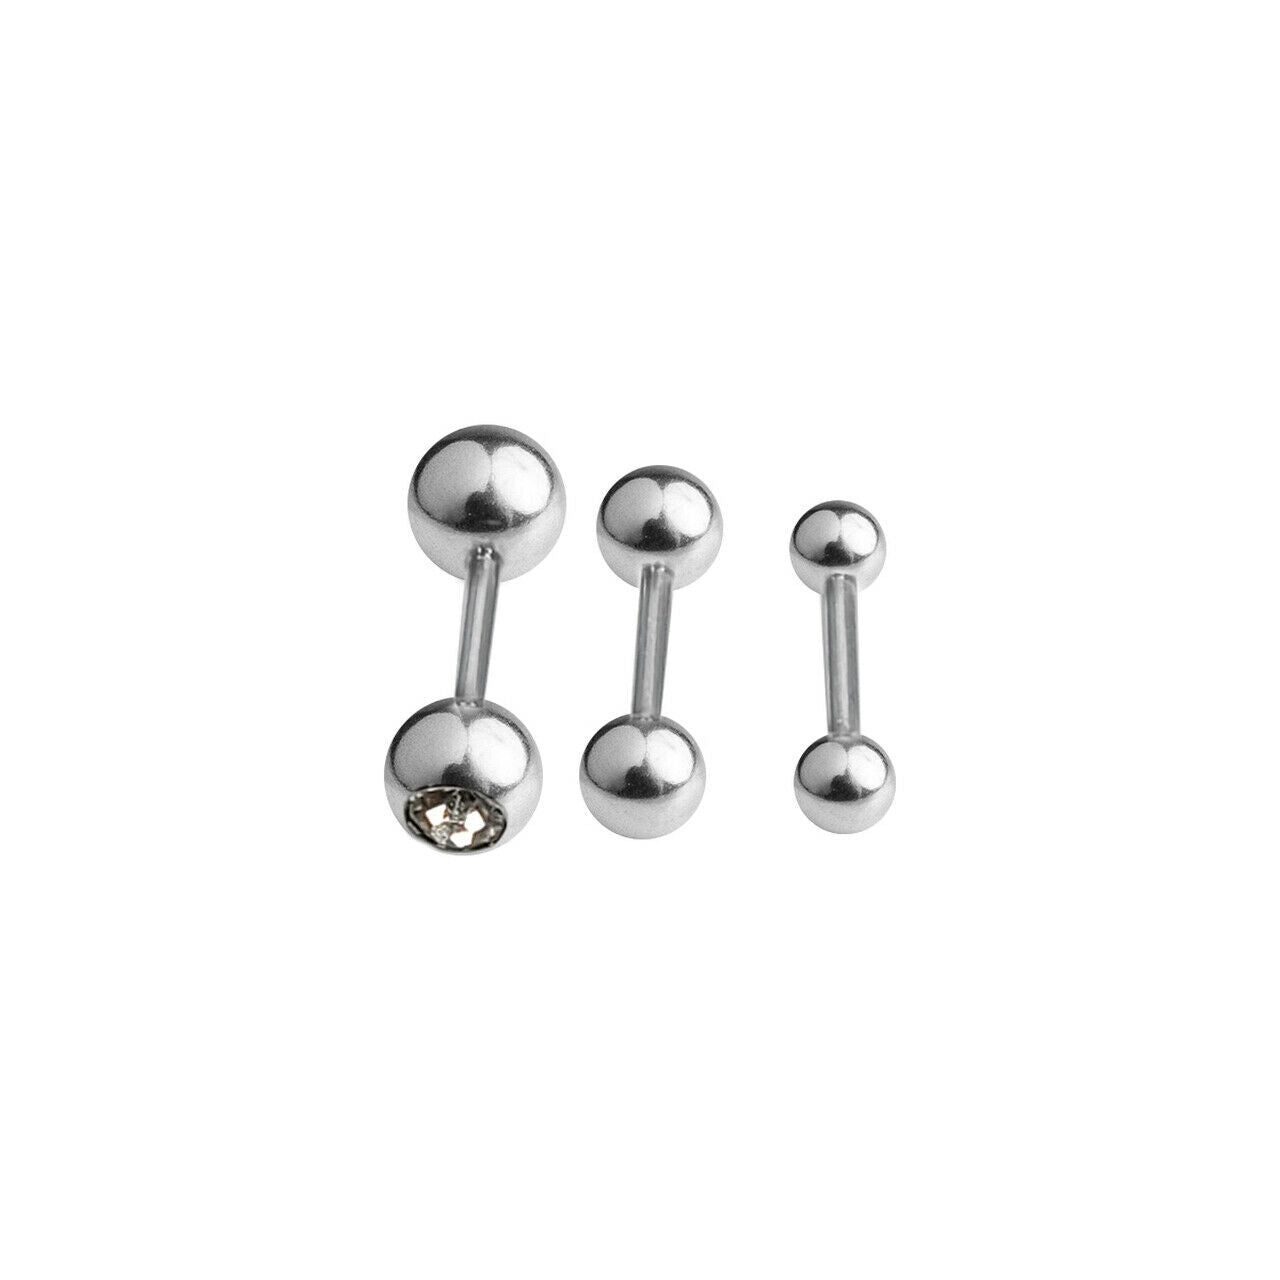 Micro Barbells with CZ Jewel Ball Surgical Steel Cartilage Earring 16g Set of 3